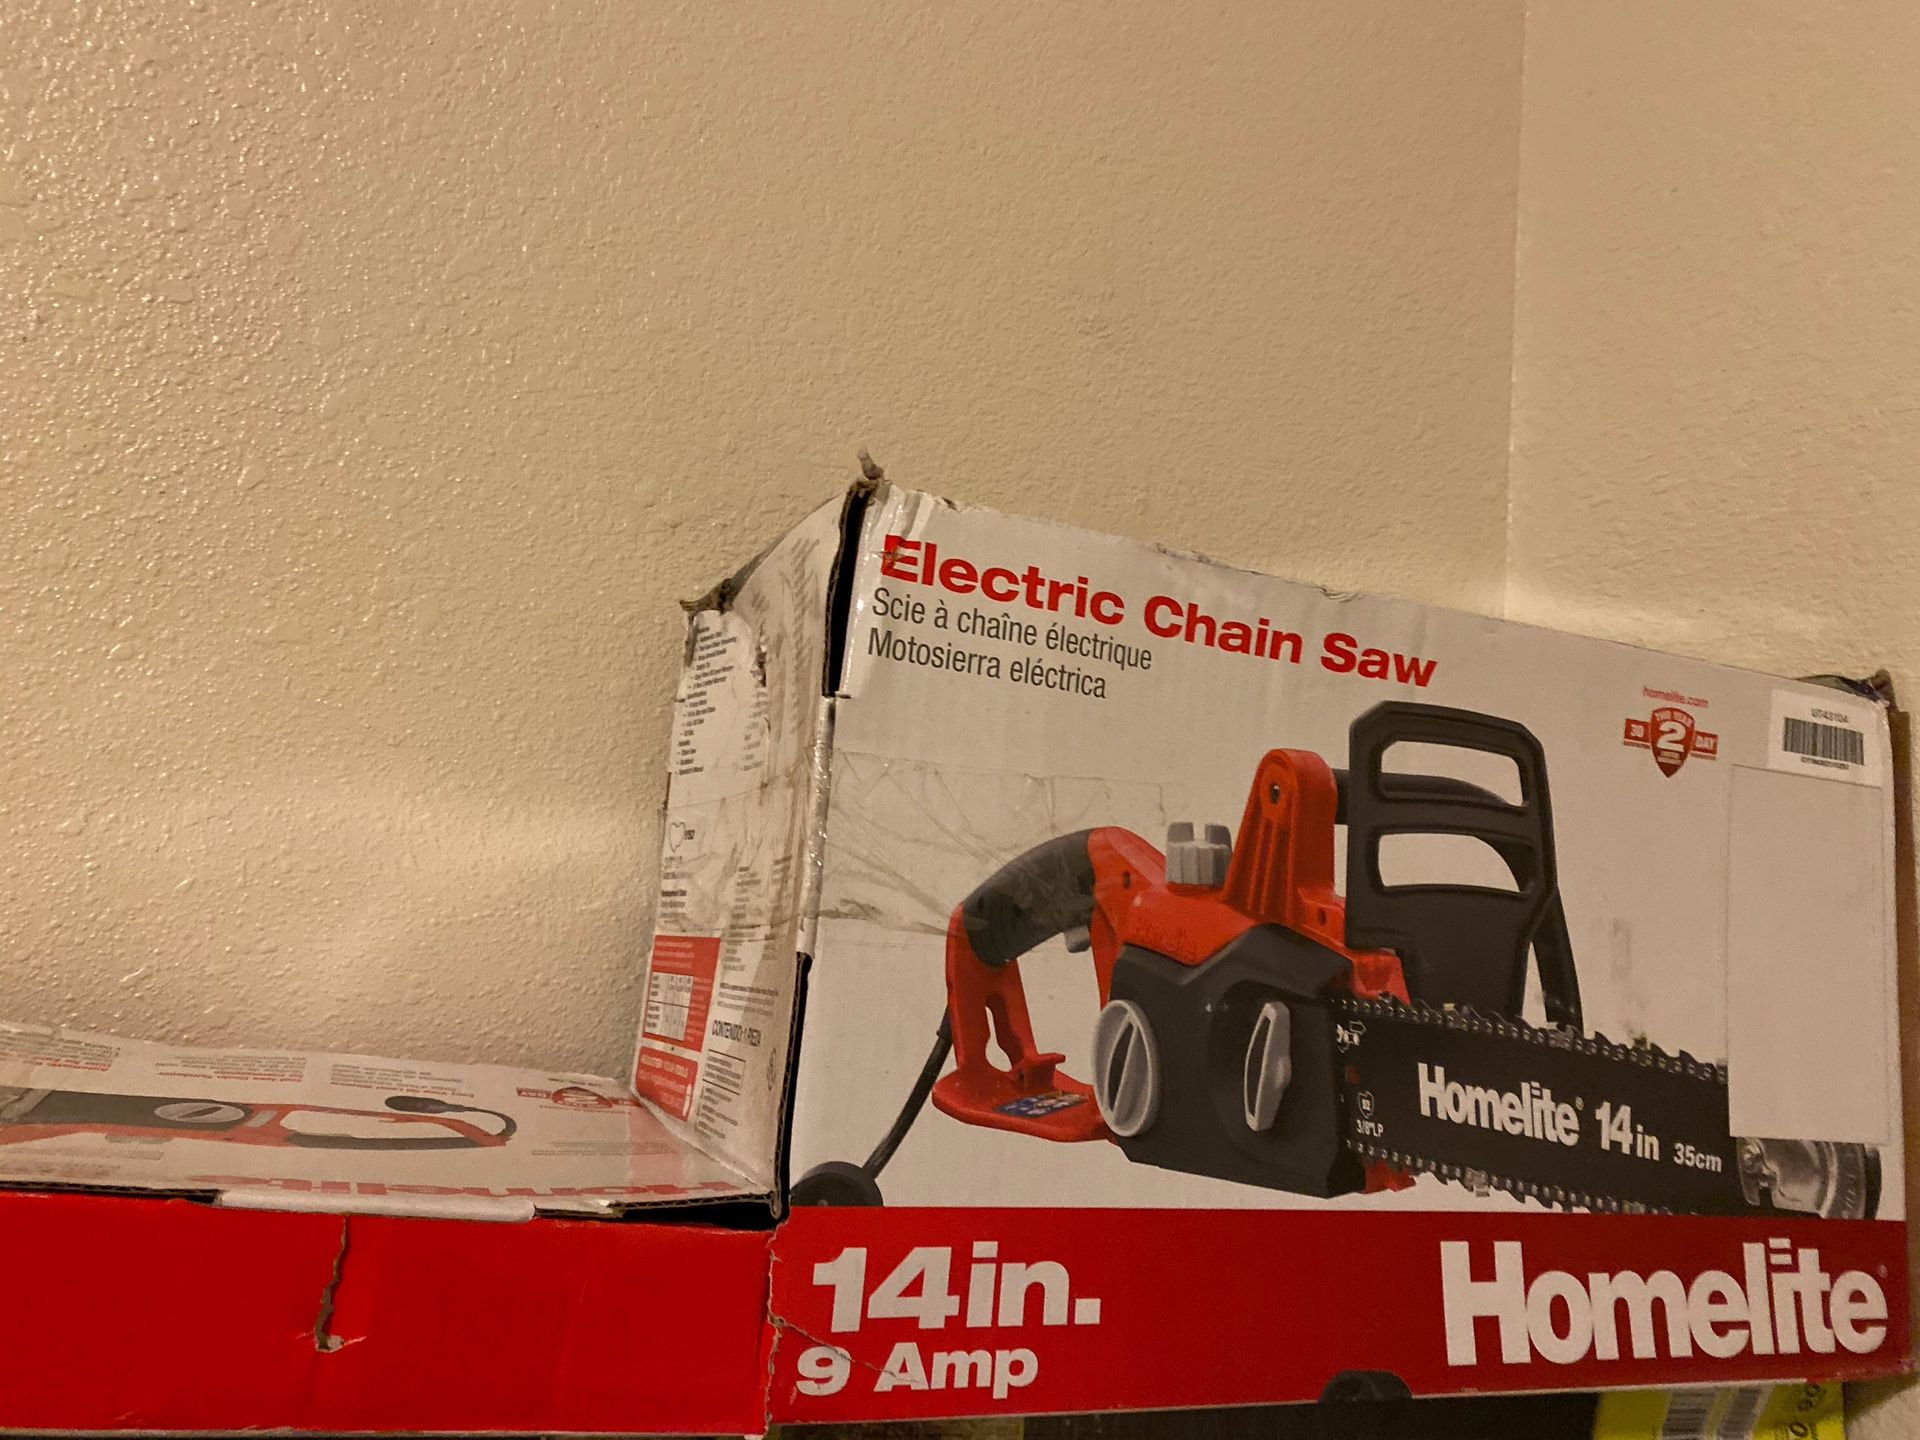 Homelite electric chainsaw